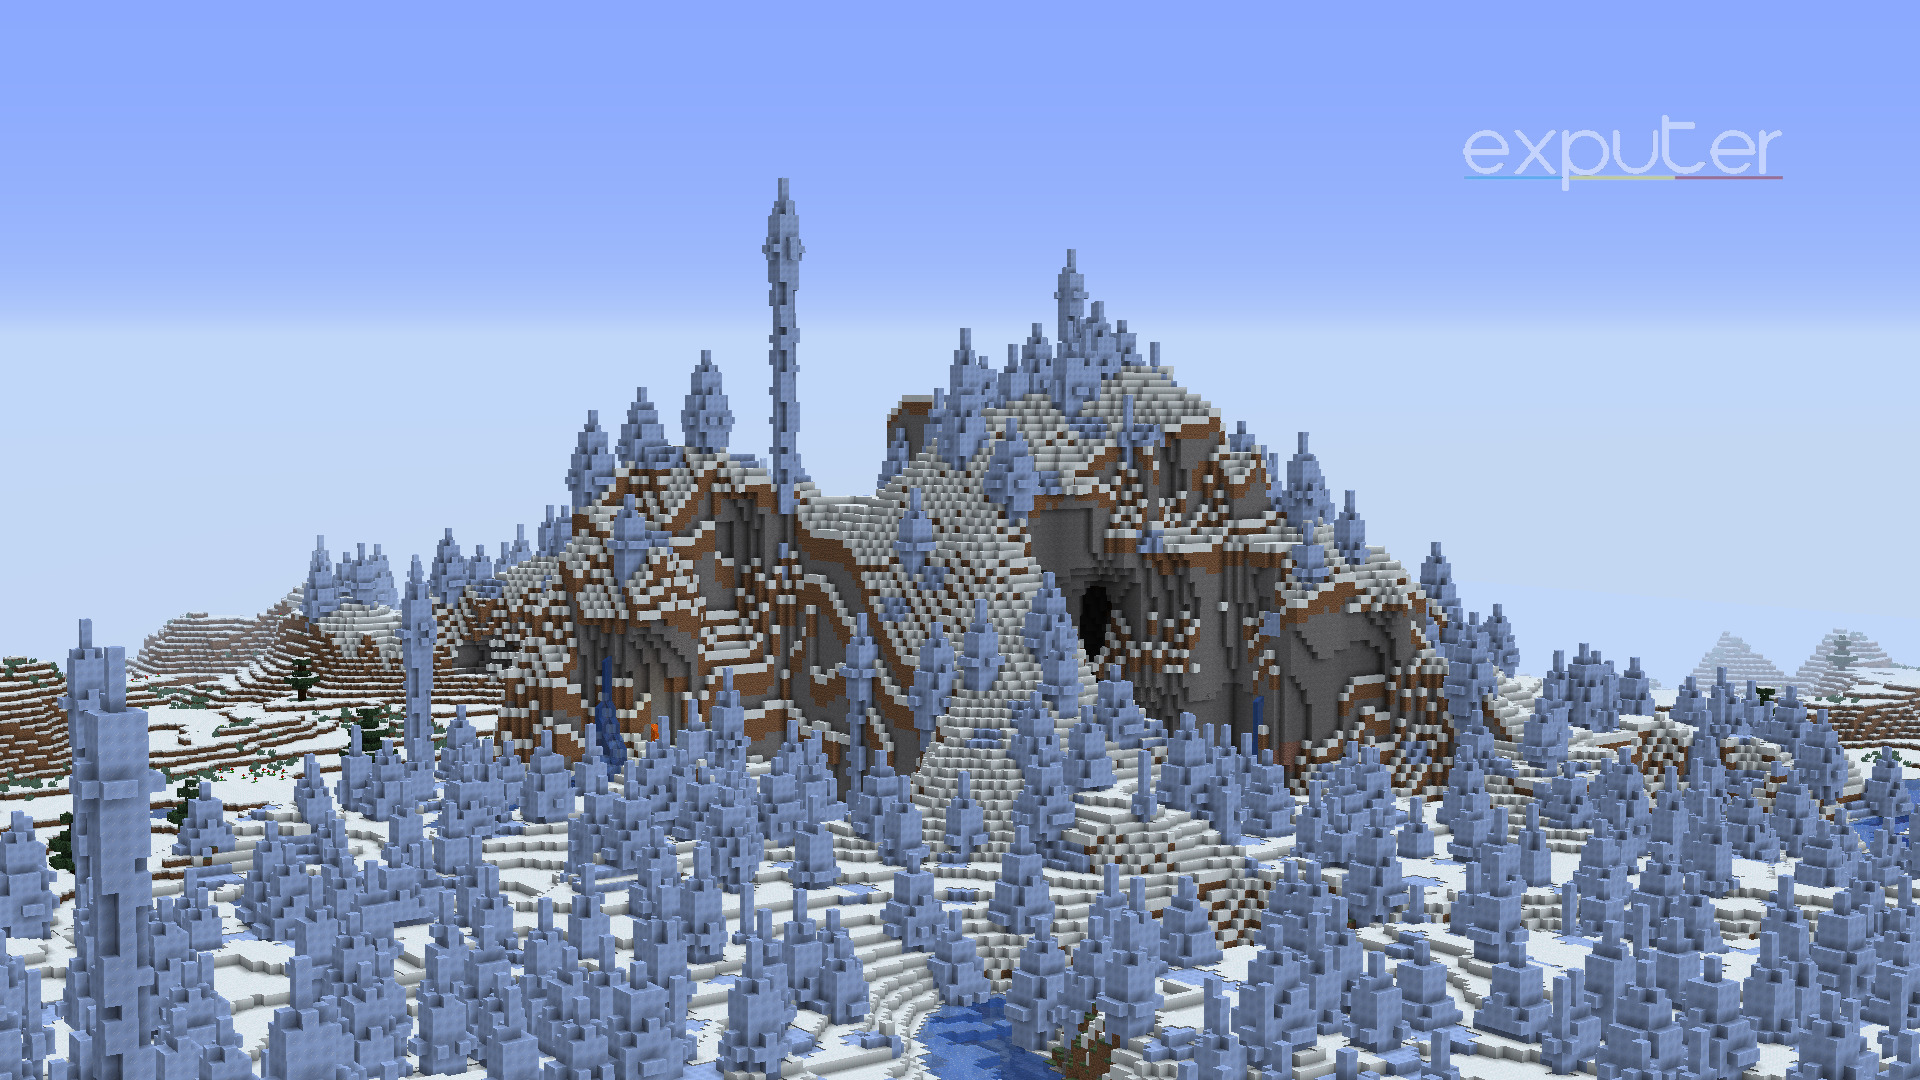 The Best Snow Biome seed in 1.13.2 Minecraft.